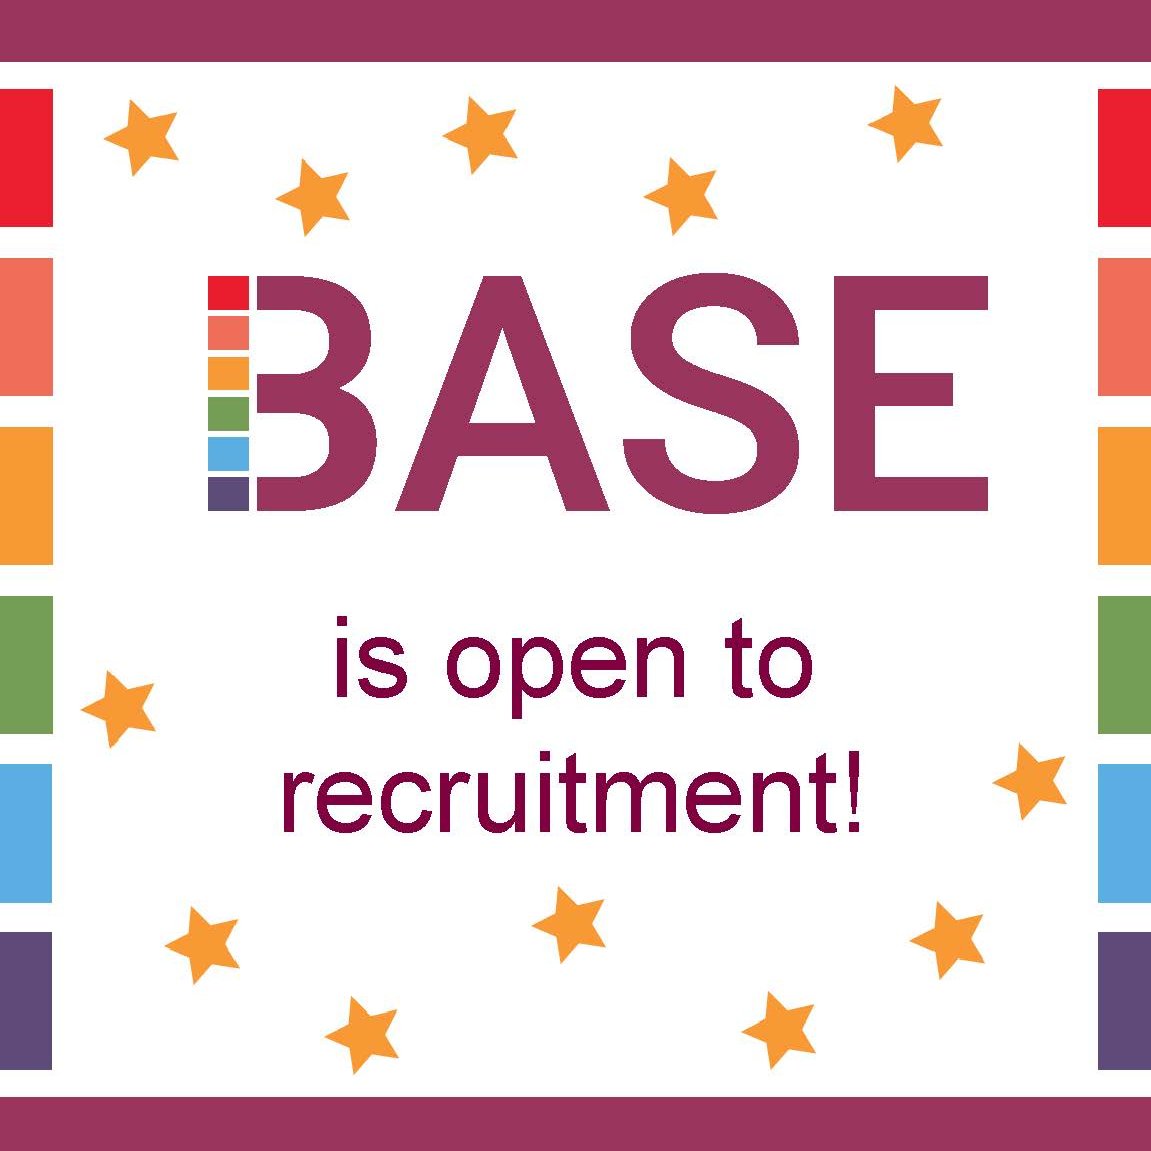 We are delighted to announce that @BASEtrial is now open to recruitment! 🙌 @NPEU_CTU @NPEU_Oxford